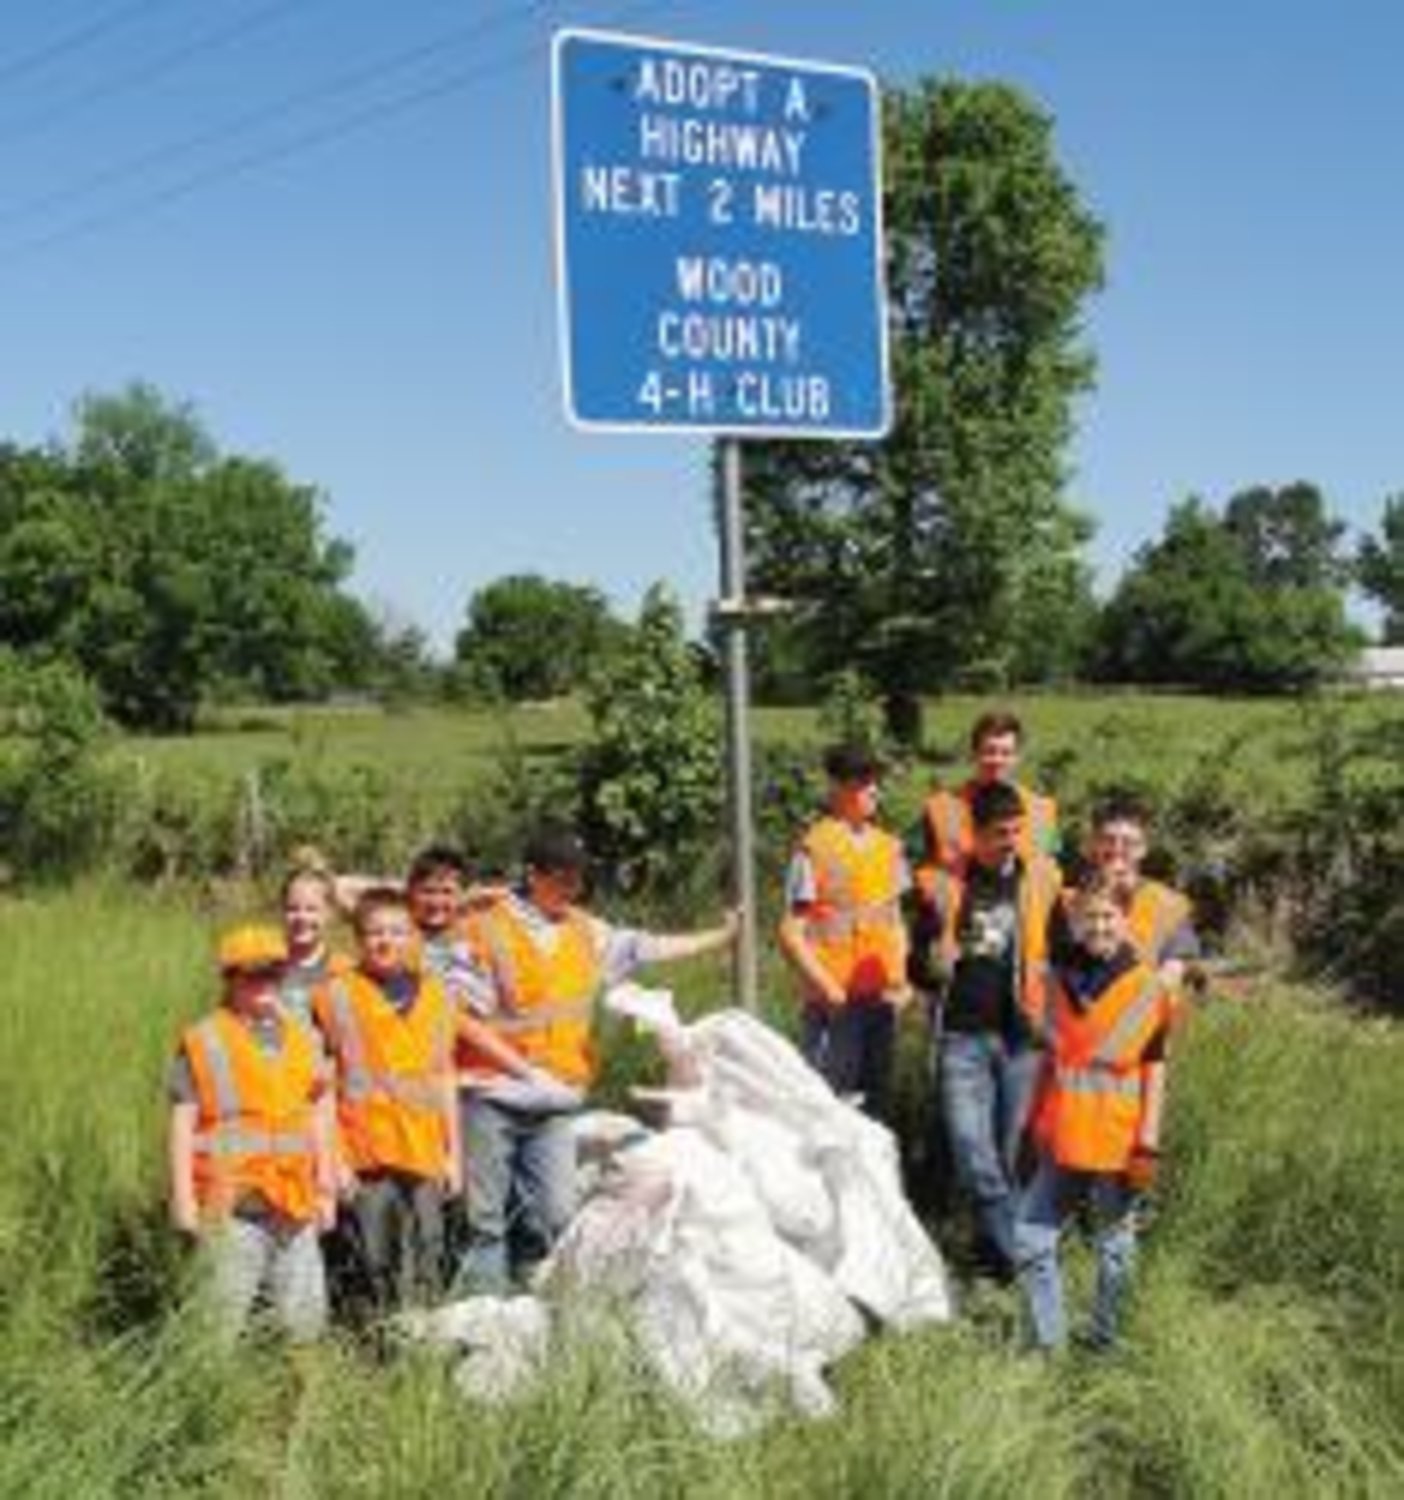 After a long day of picking up trash, members of the Wood County 4-H club gather around their highway sign.